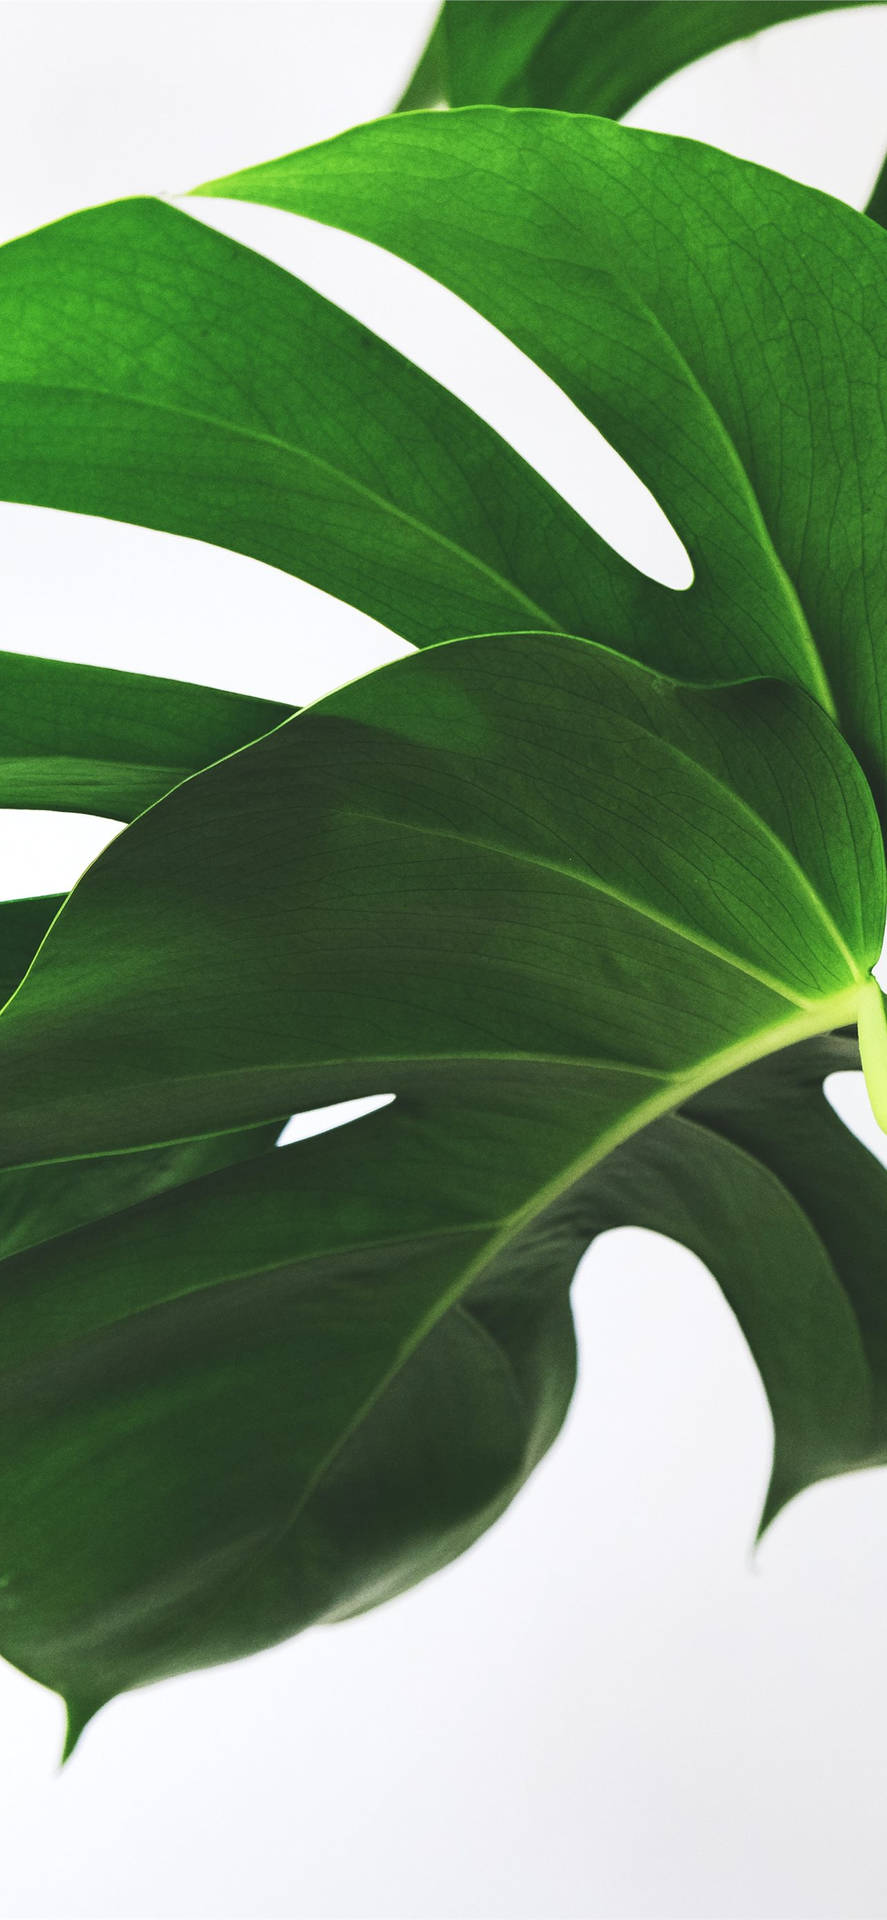 Go green with a Plant-ified iPhone! Wallpaper